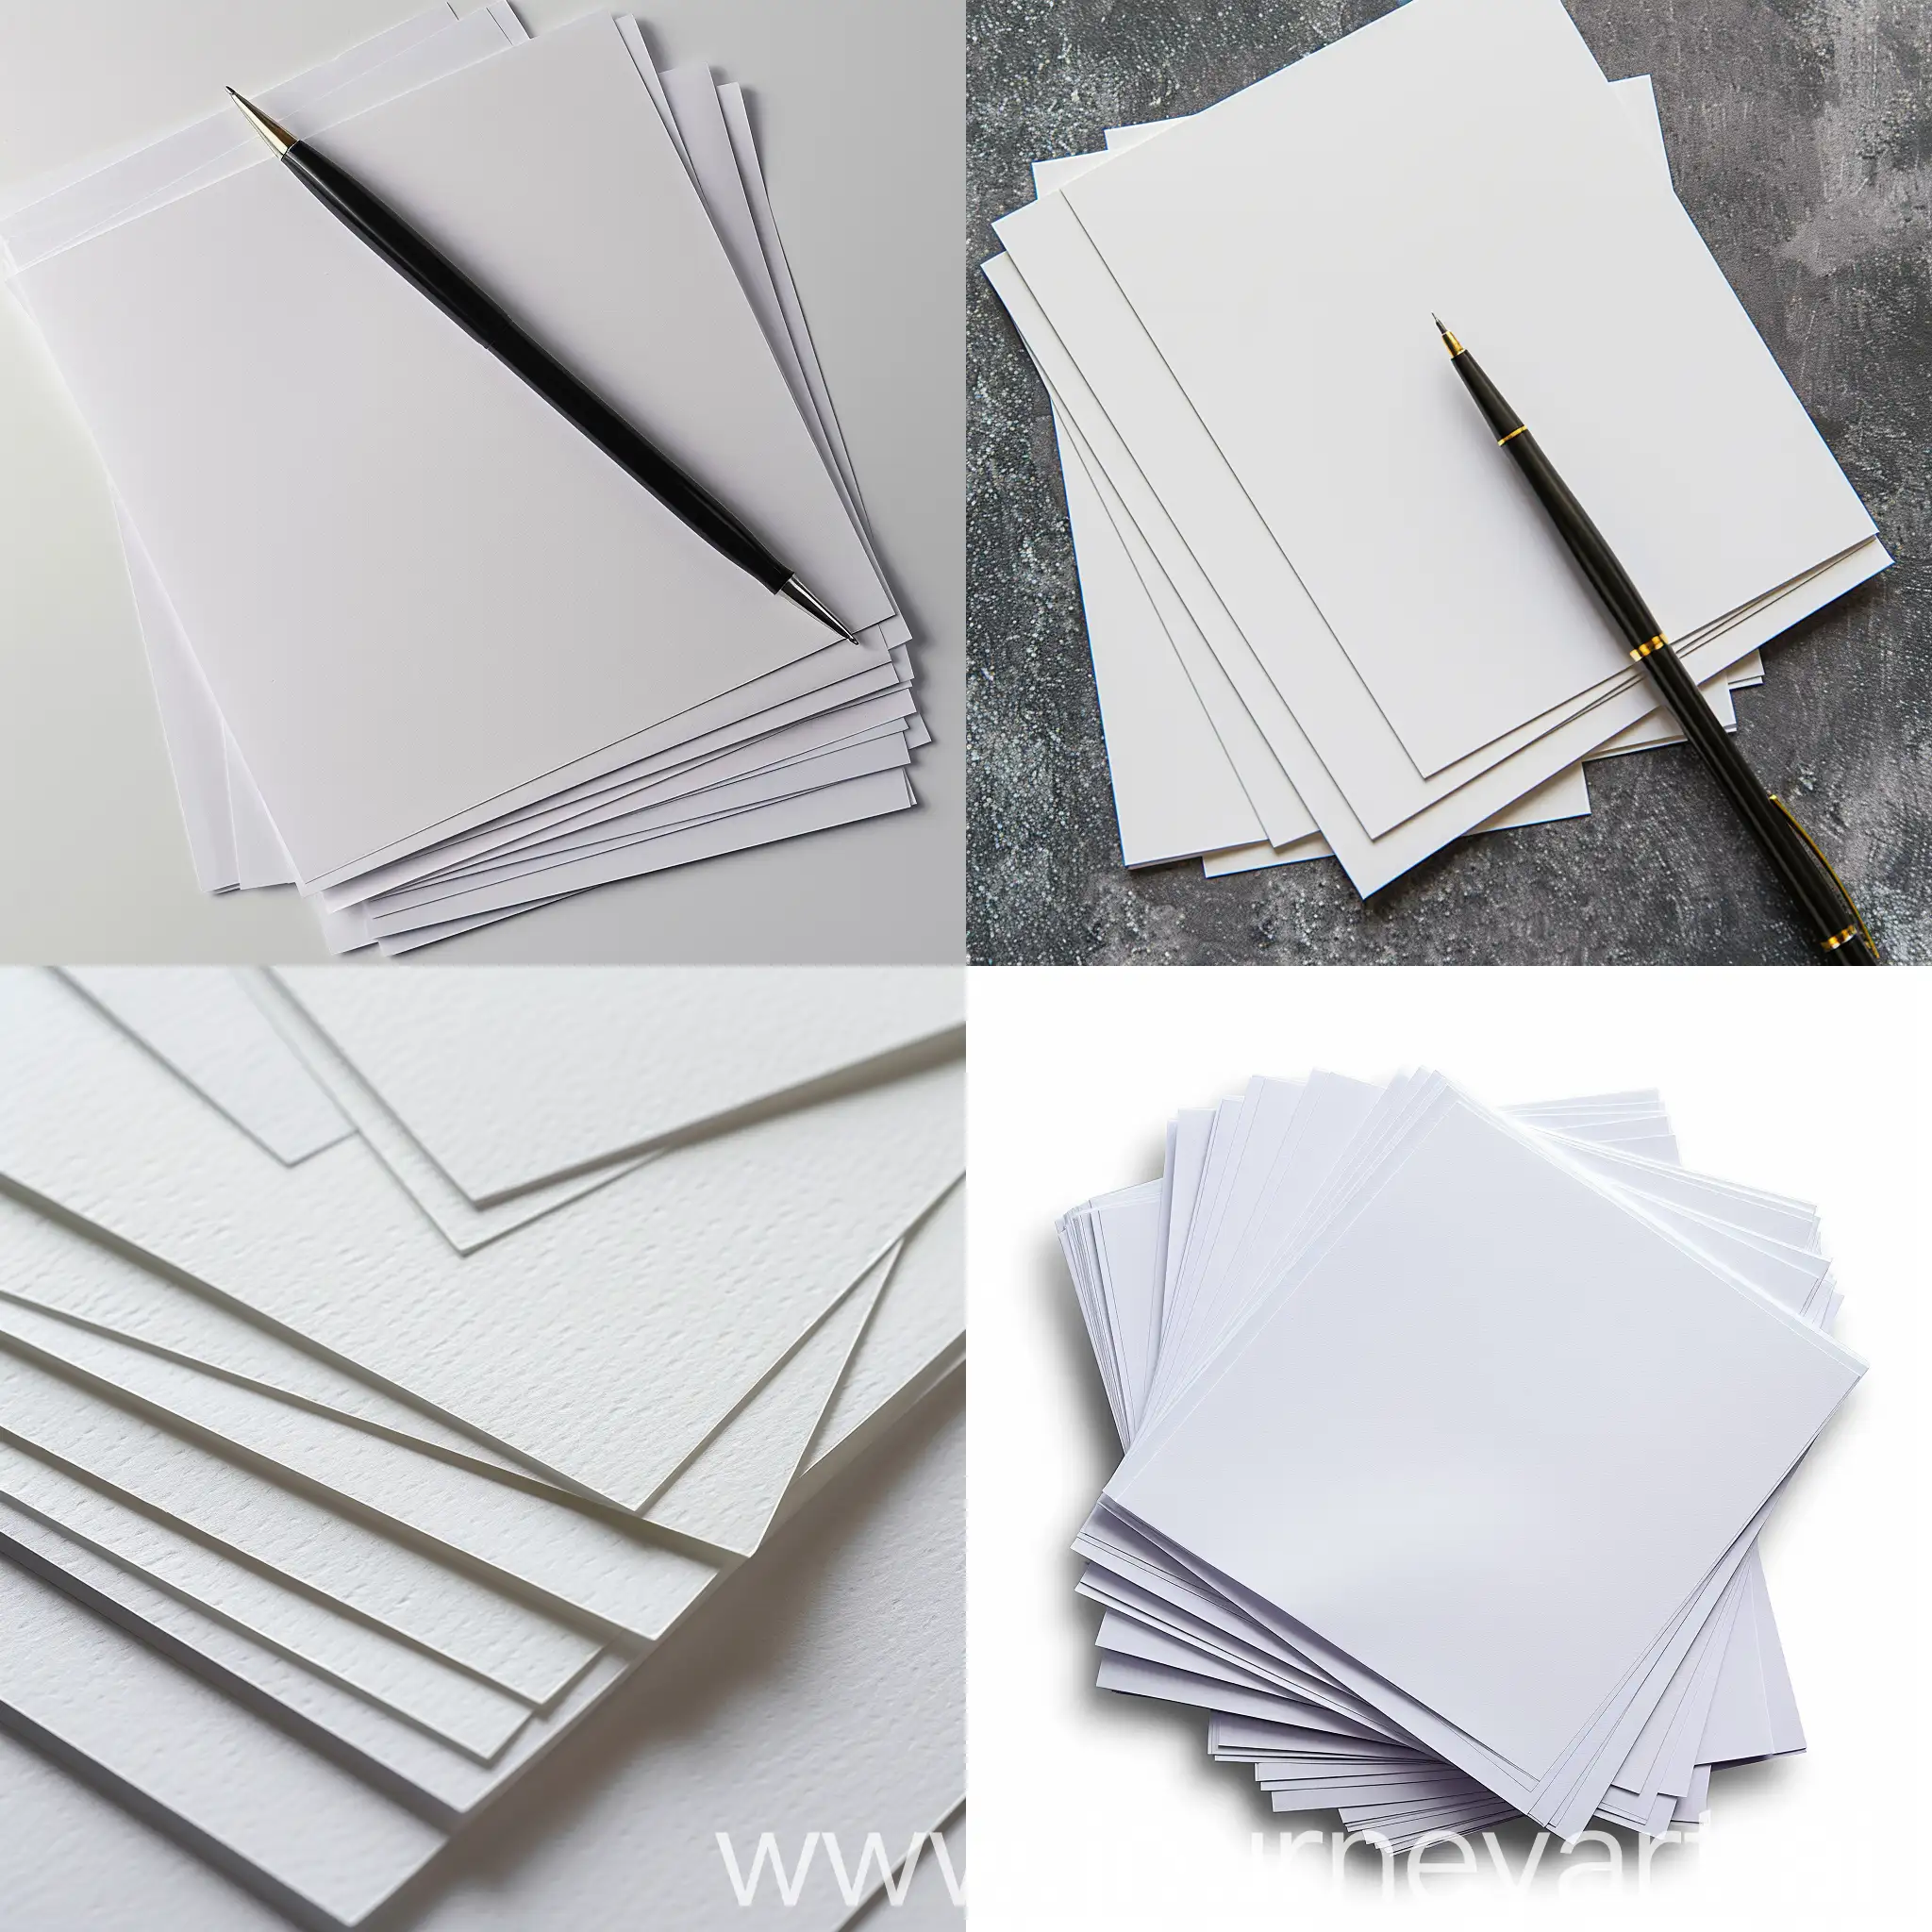 Versatile-Writing-Paper-HighQuality-Smooth-Texture-and-Perfect-for-Various-Applications